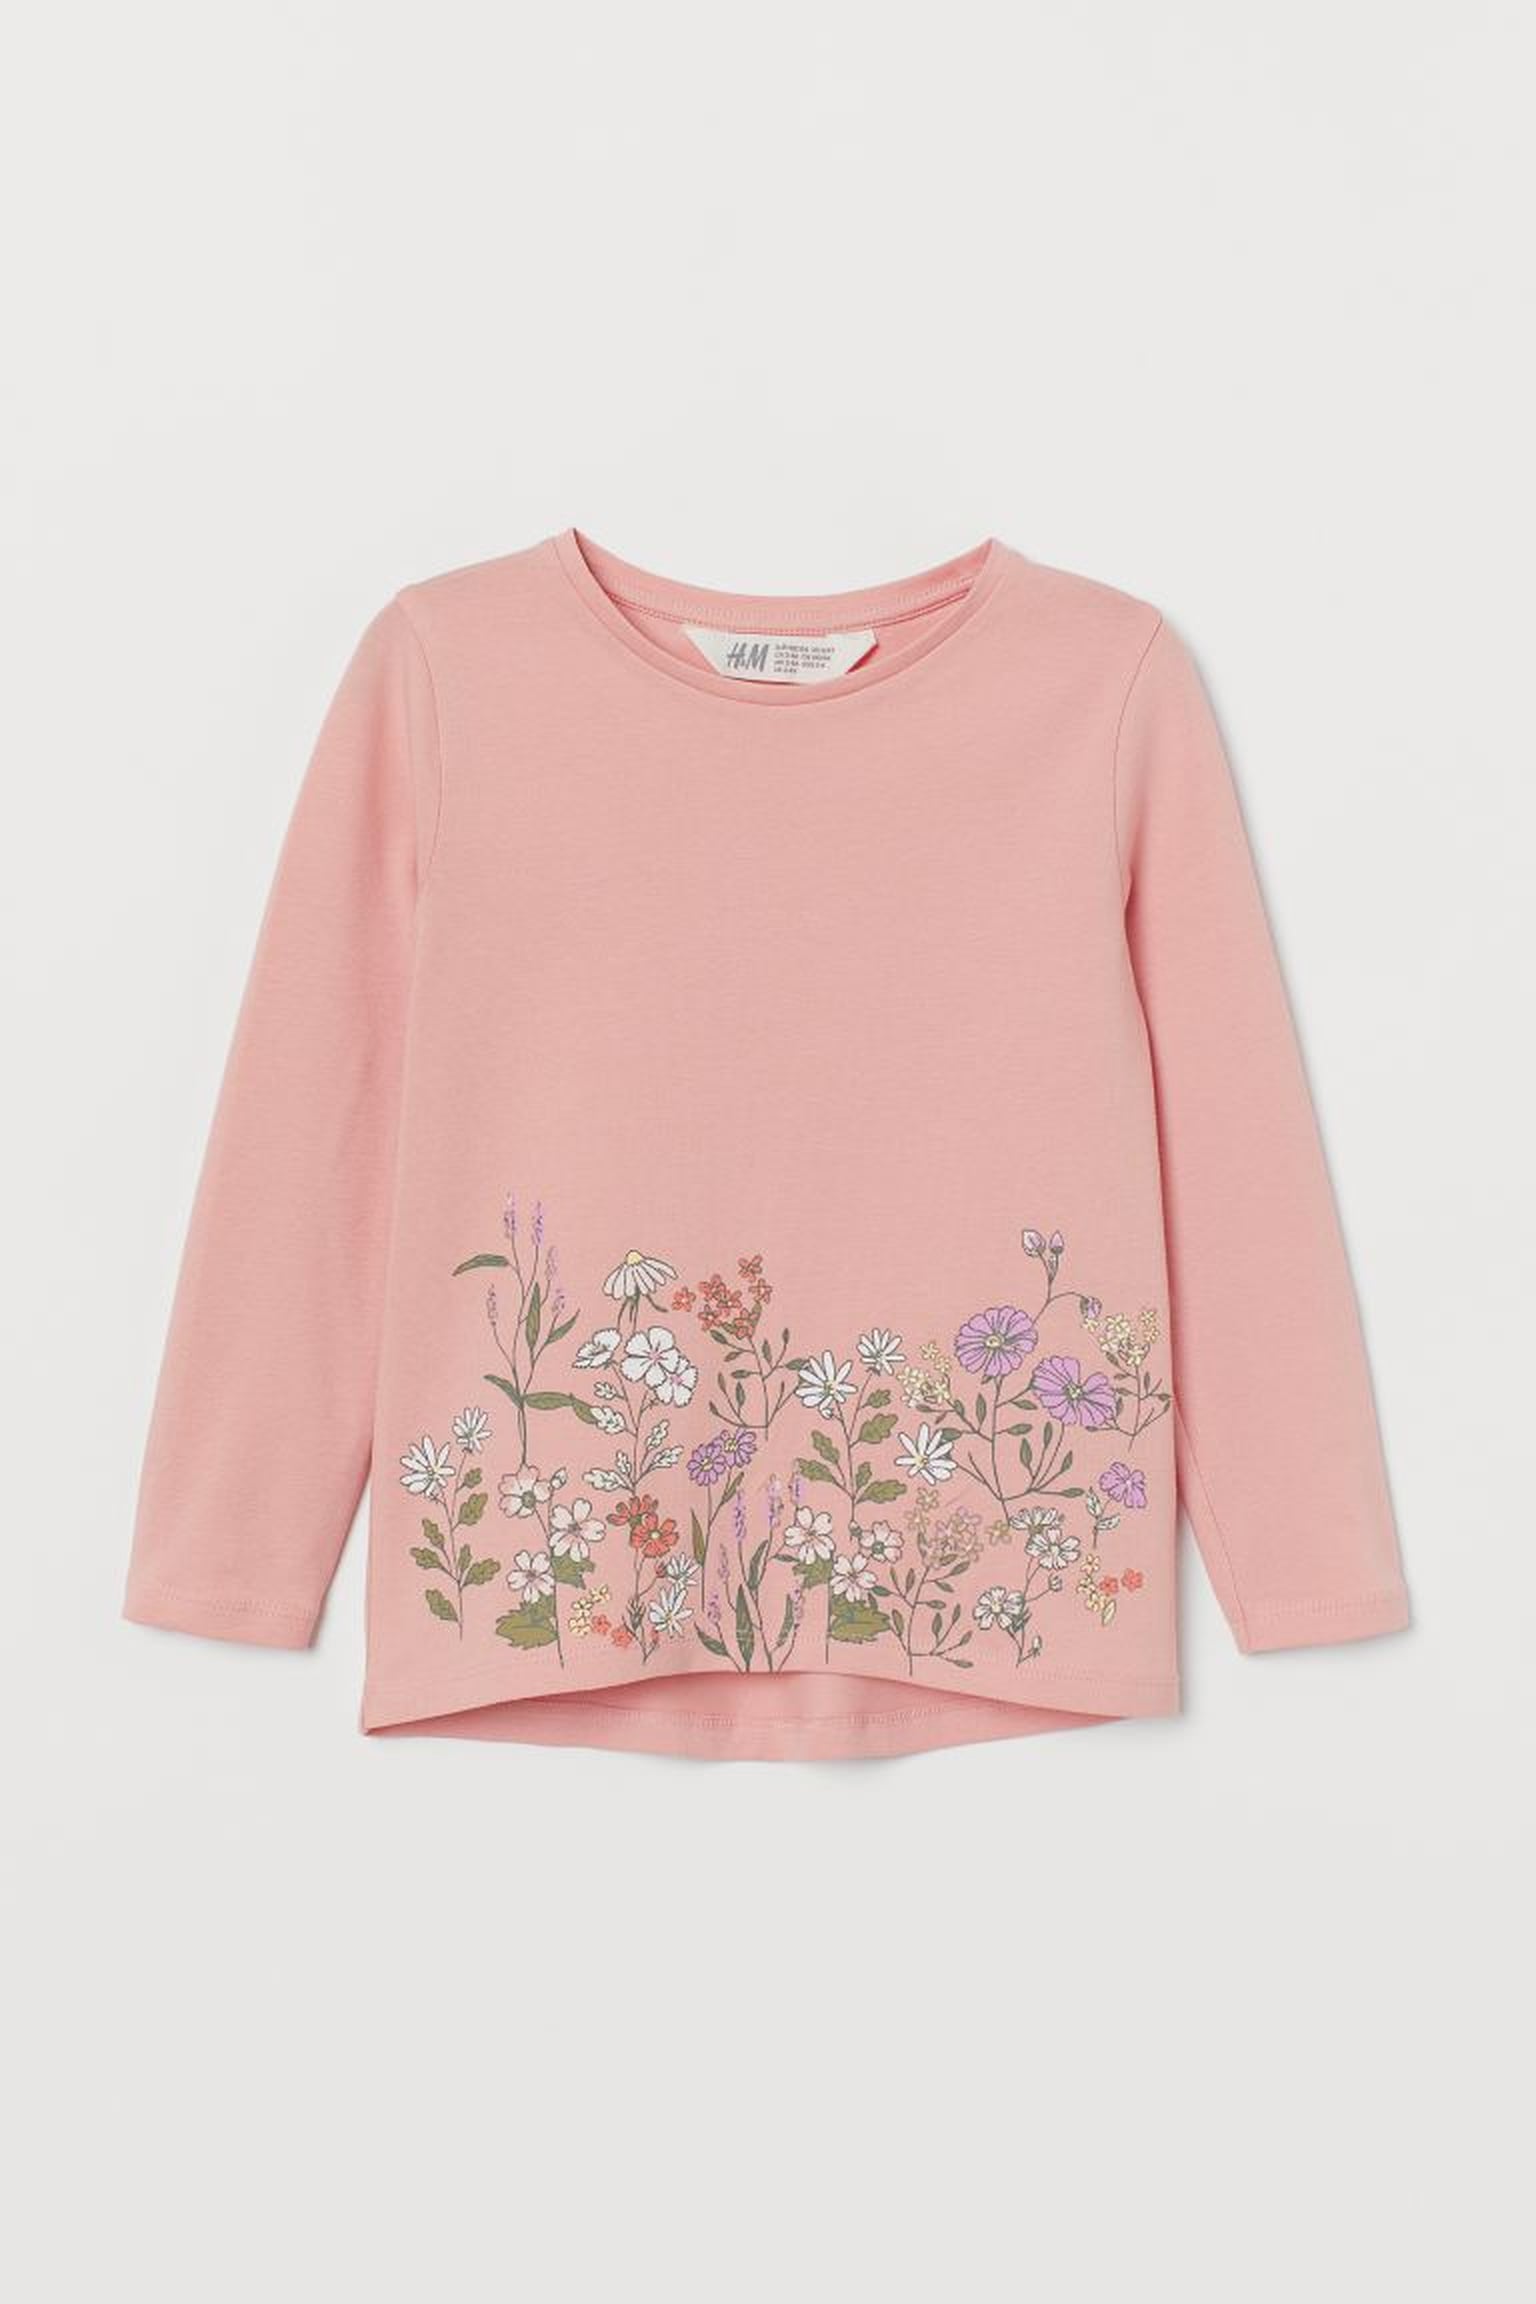 Cute Basic Kids' Clothes From H&M | POPSUGAR Family